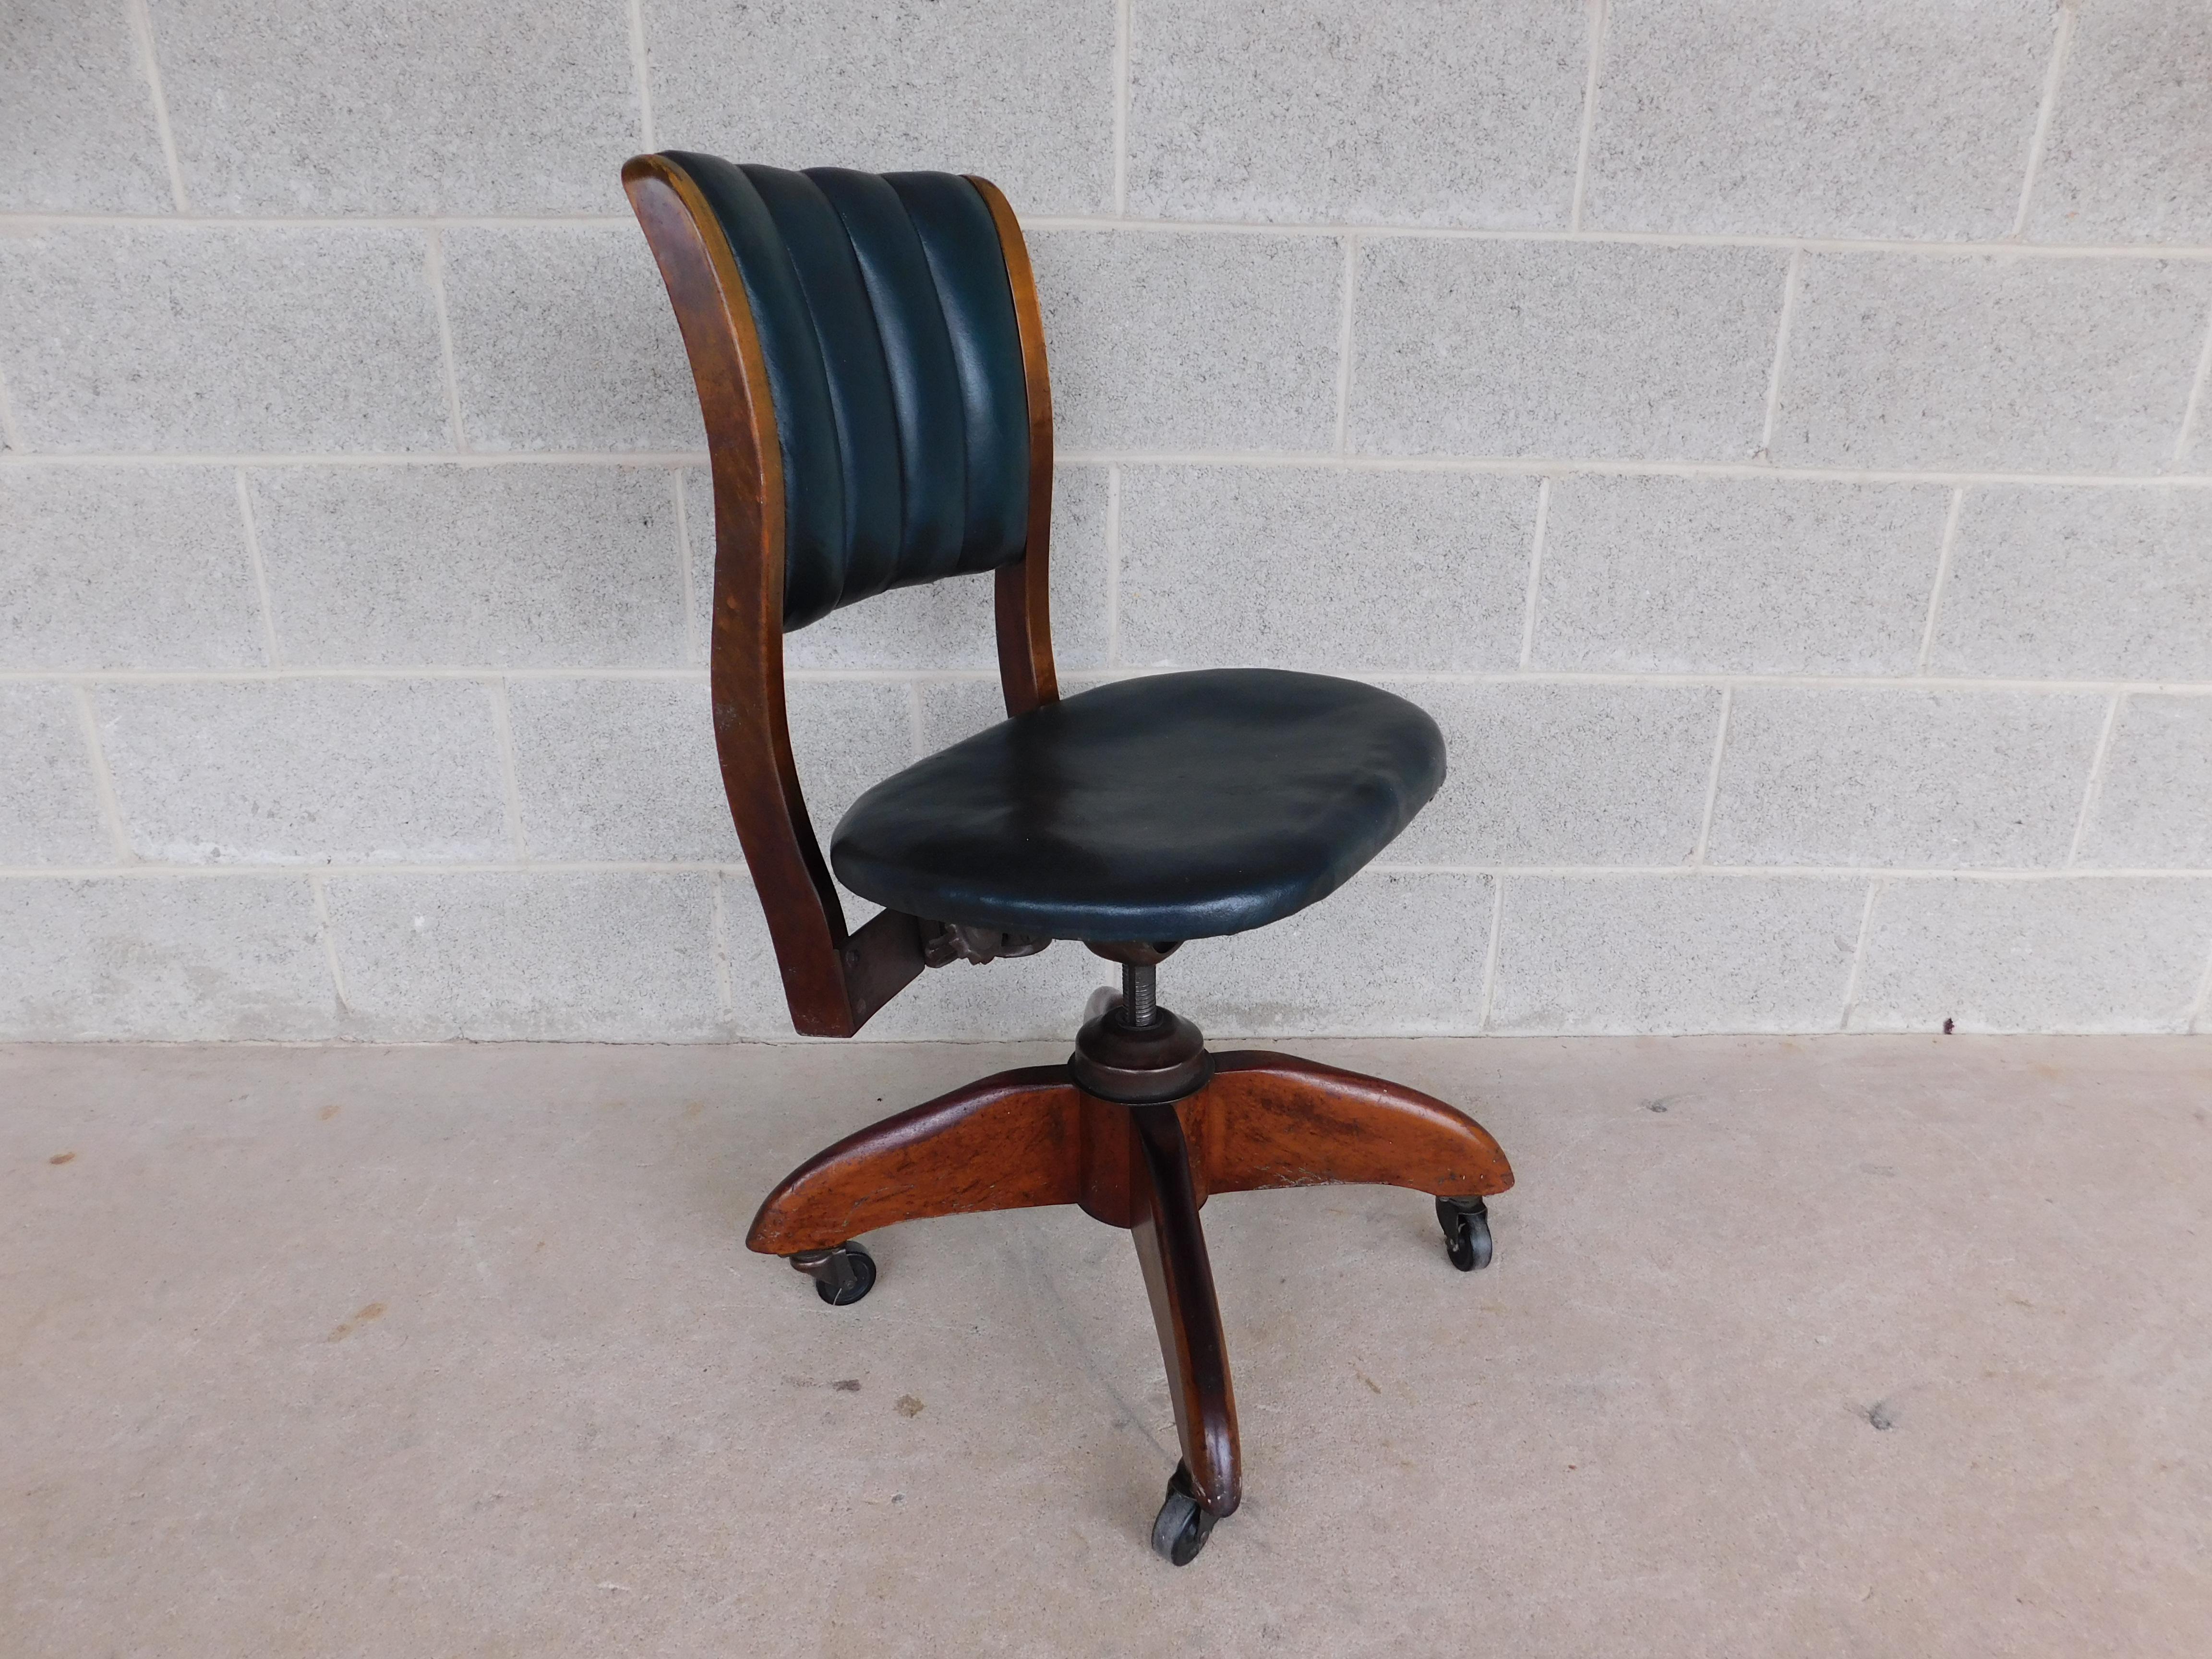 Antique Art Deco swivel office desk chair by Gunlocke circa 1930s Art Deco period featuring vertical tufted back rest, screw style height adjustment, mahogany base and frame with original polo green leather. 

Back height 33